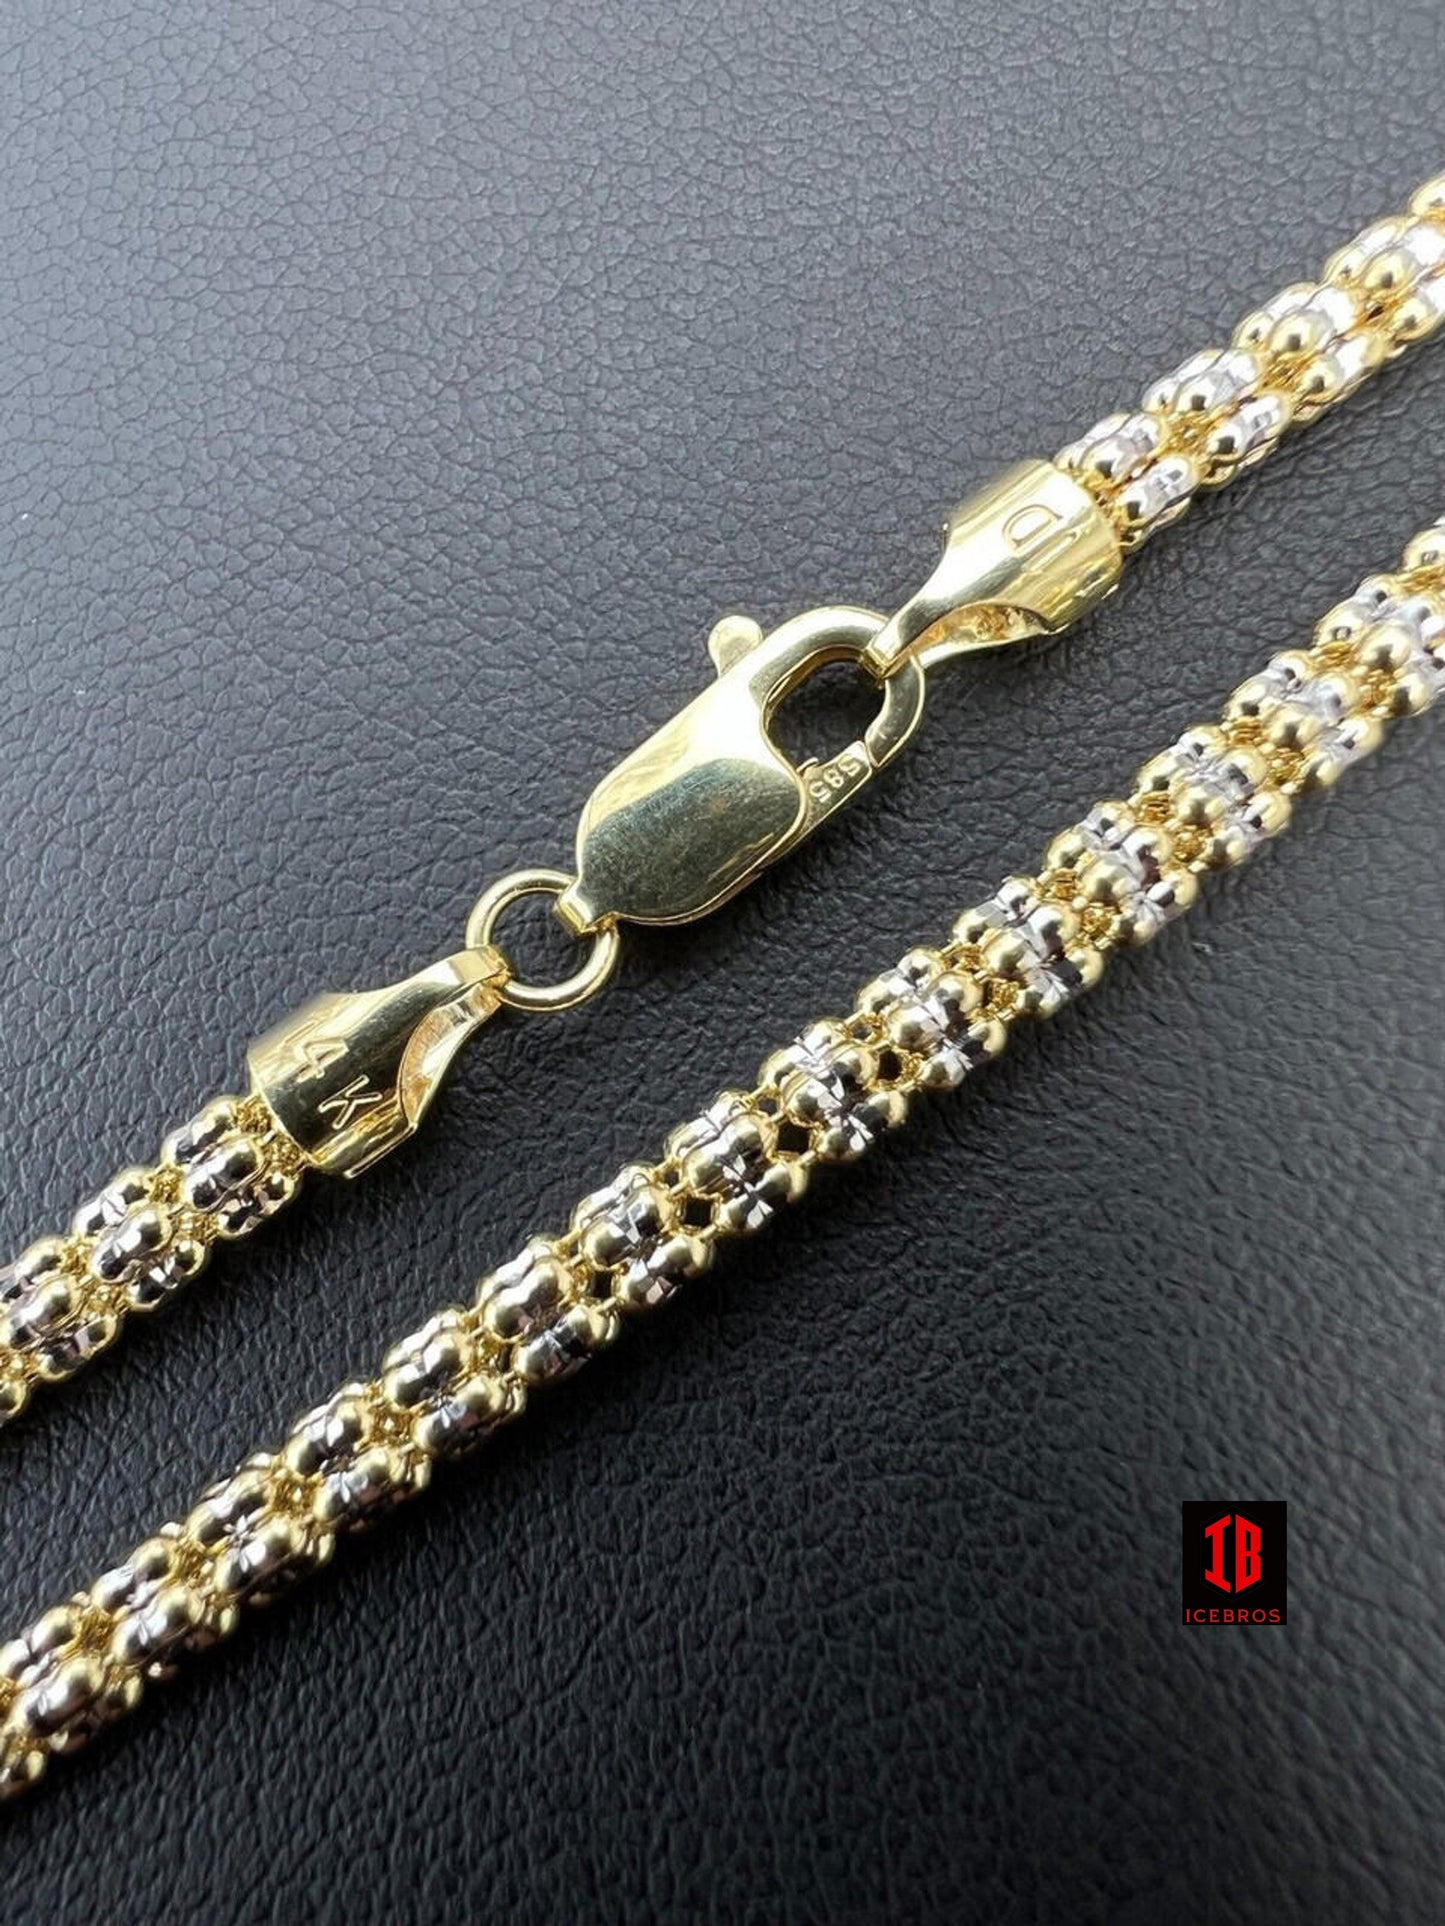 14k Genuine Solid Yellow & White Gold Sparkle Ice Link Chain Necklace Diamond cut Two Tone